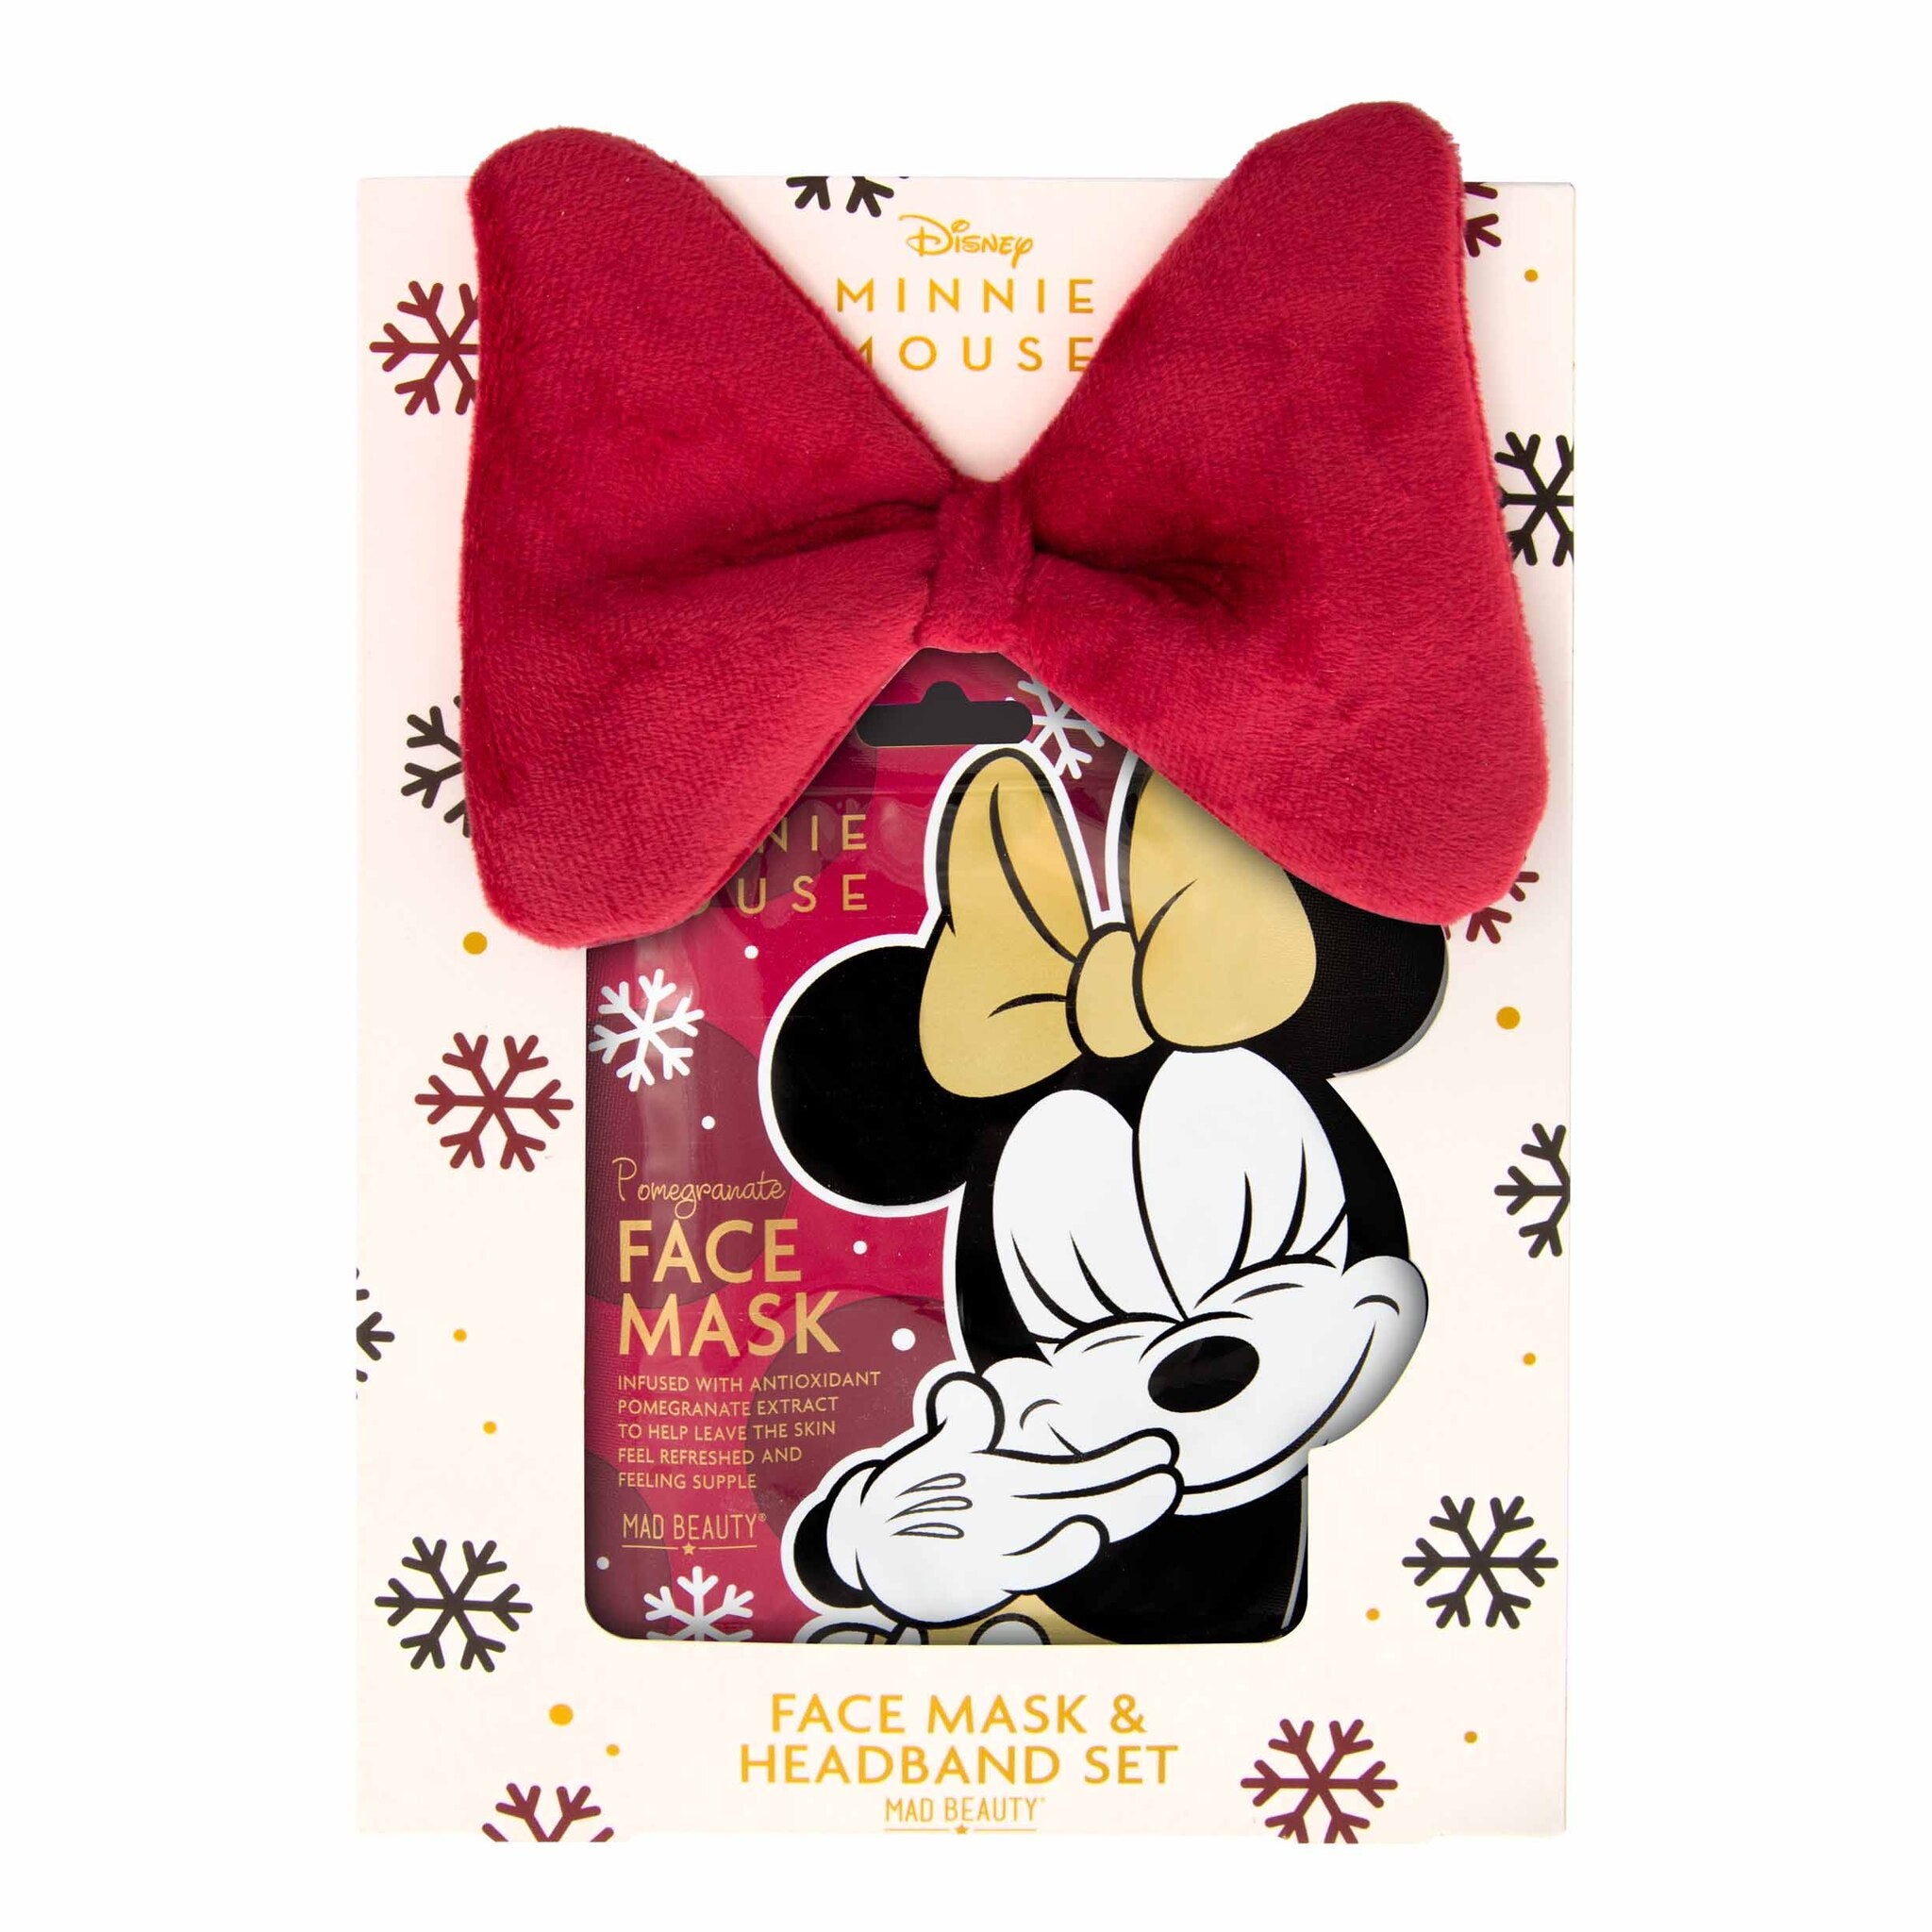 Minnie Mouse GG Face Mask, GG Face Mask, Filtered Face Mask